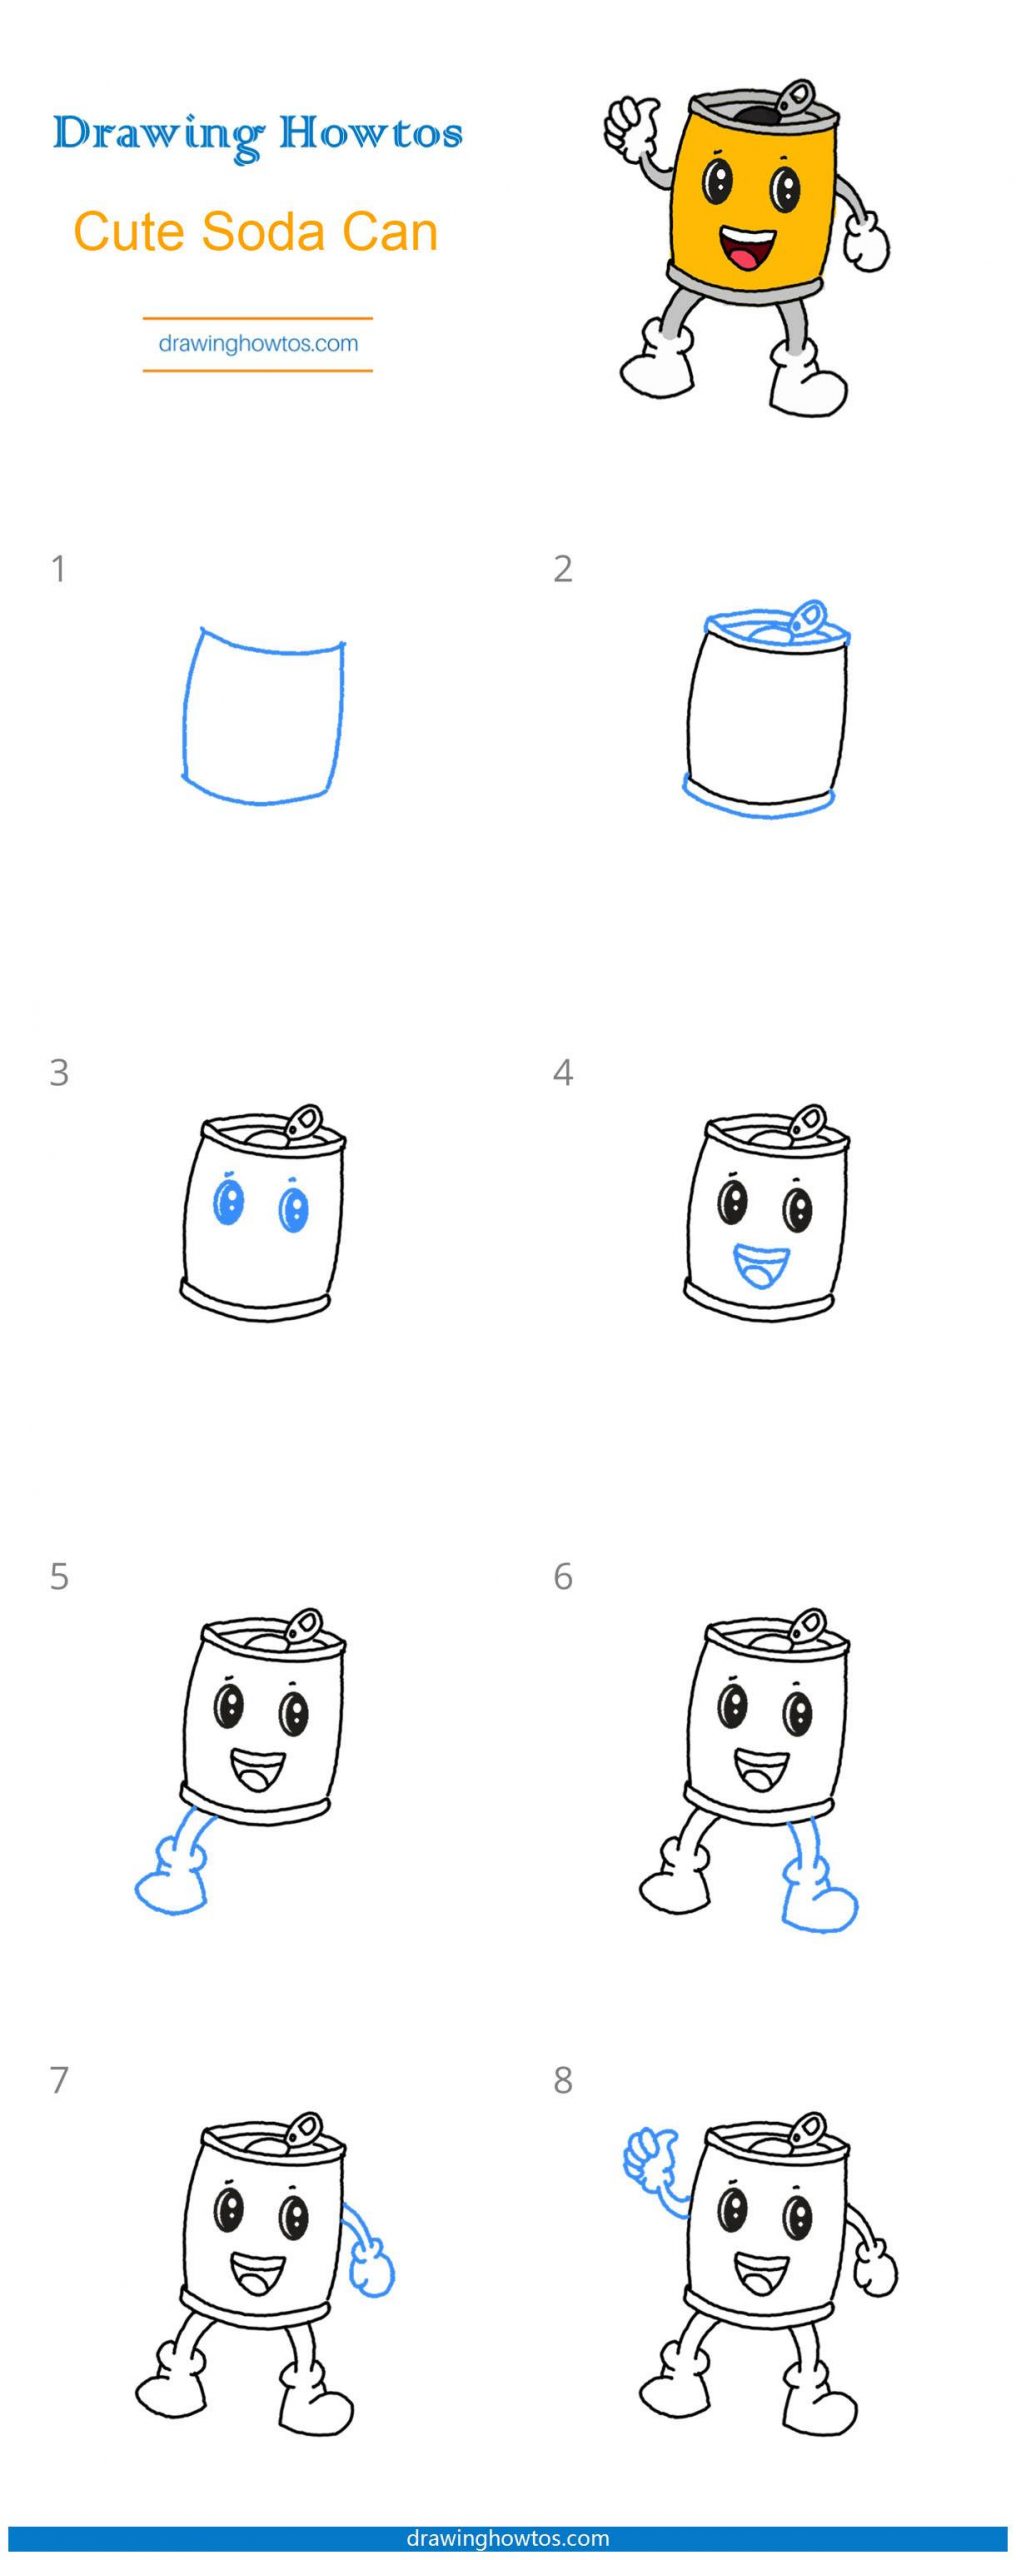 How to Draw a Cute Soda Can Step by Step